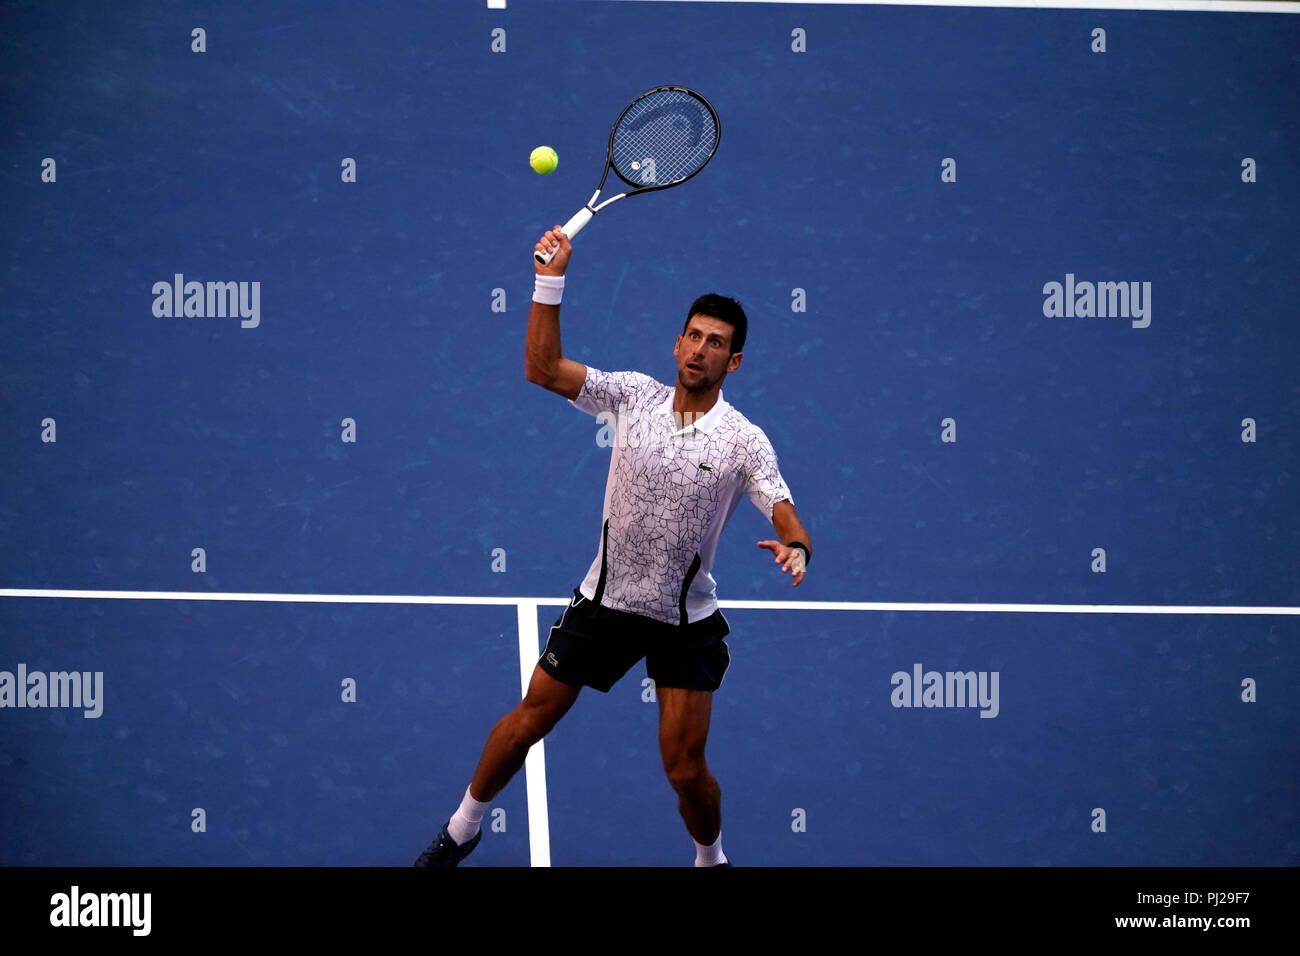 Flushing Meadows, New York - September 3, 2018: US Open Tennis:  Number 6 seed Novak Djokovic in action against Joao Sousa of Portugal during their fourth round match at the US Open in Flushing Meadows, New York.  Djokovic won in straight sets. Credit: Adam Stoltman/Alamy Live News Stock Photo